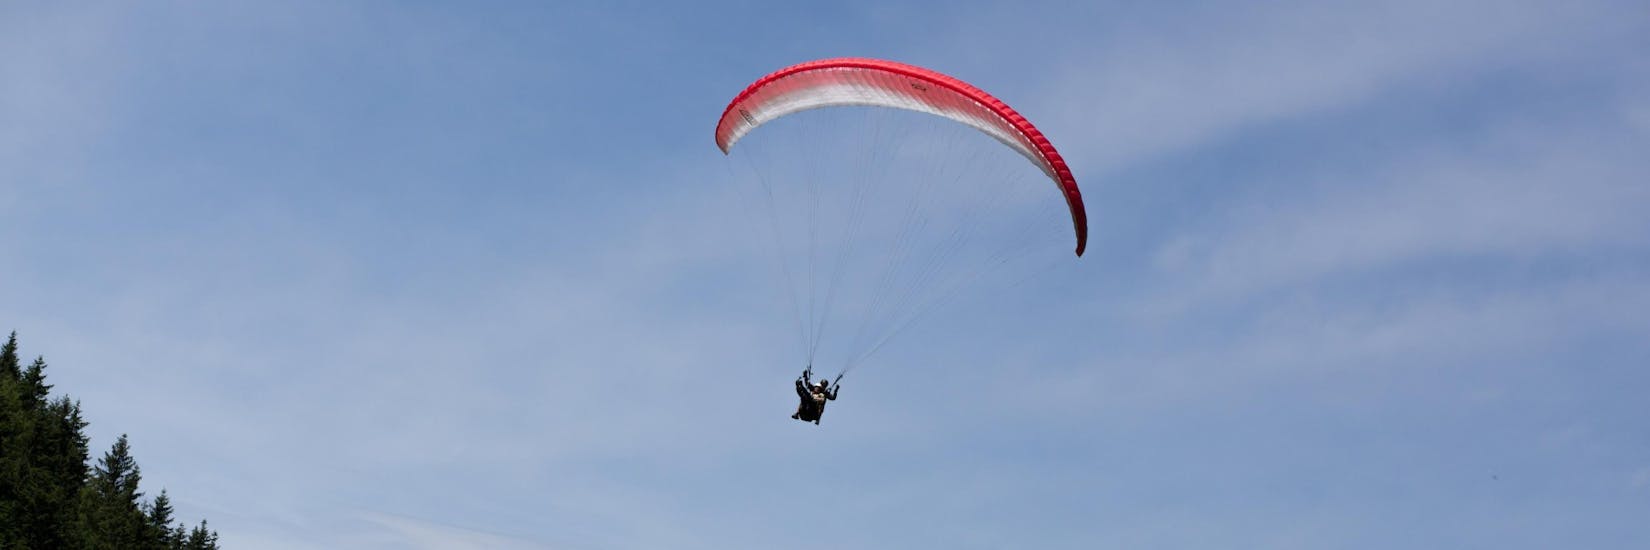 A tandem paraglider in the air during Tandem Paragliding from Bischling - Summit Flight with Flugschule Austriafly Werfenweng.